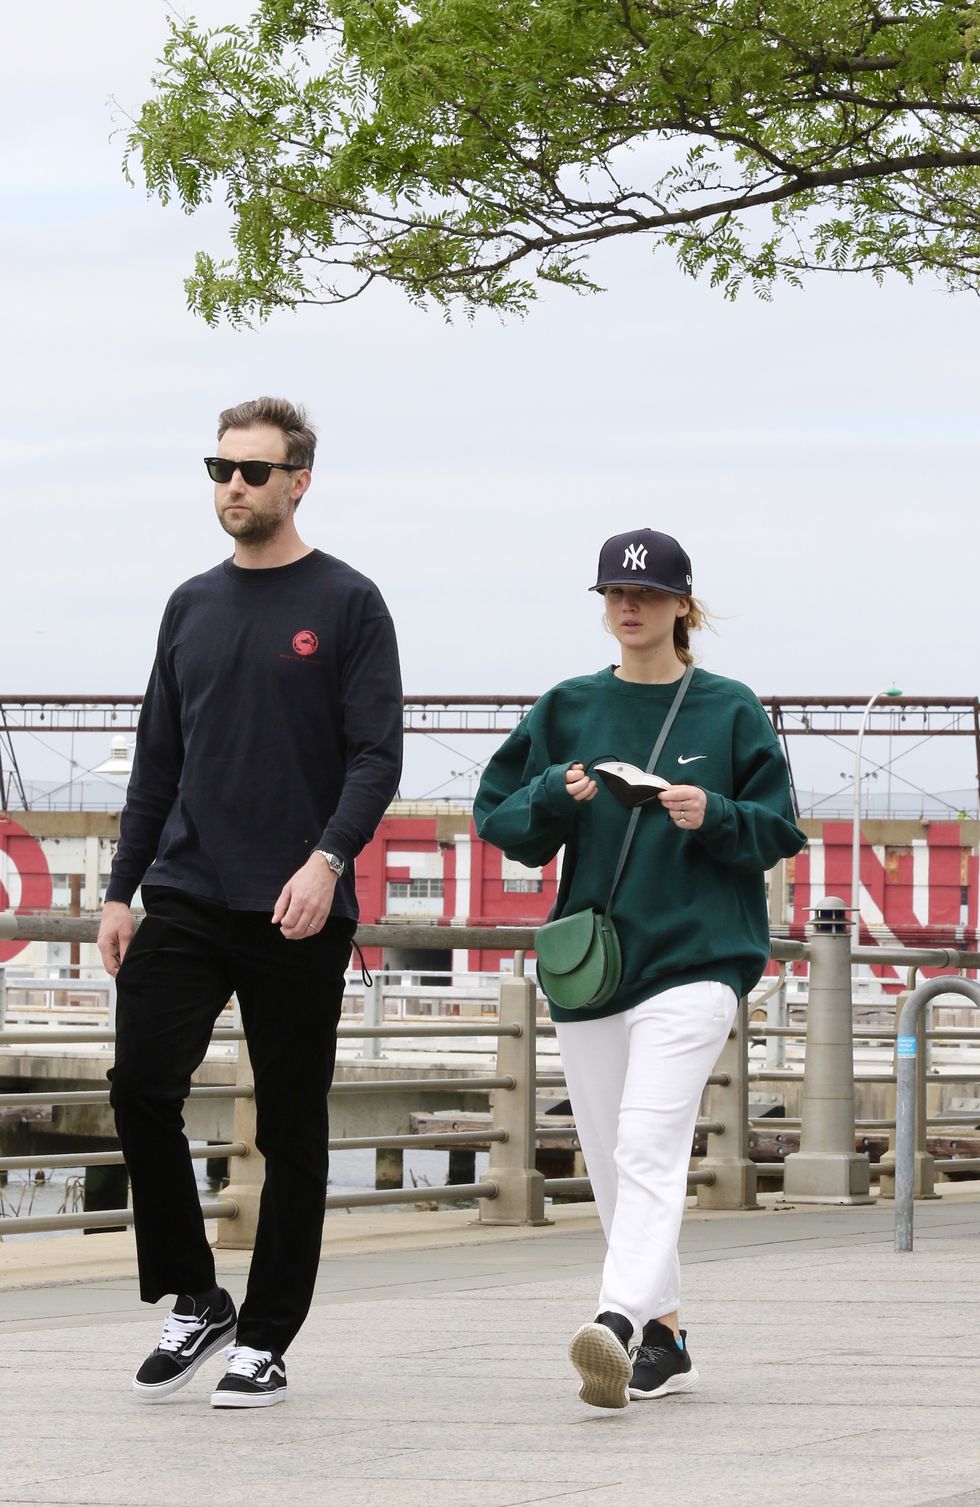 new york city, ny   may 24  jennifer lawrence is seen out for a walk by the hudson river with her husband cooke maroney on may 24, 2021 in new york city, new york photo by megagc images